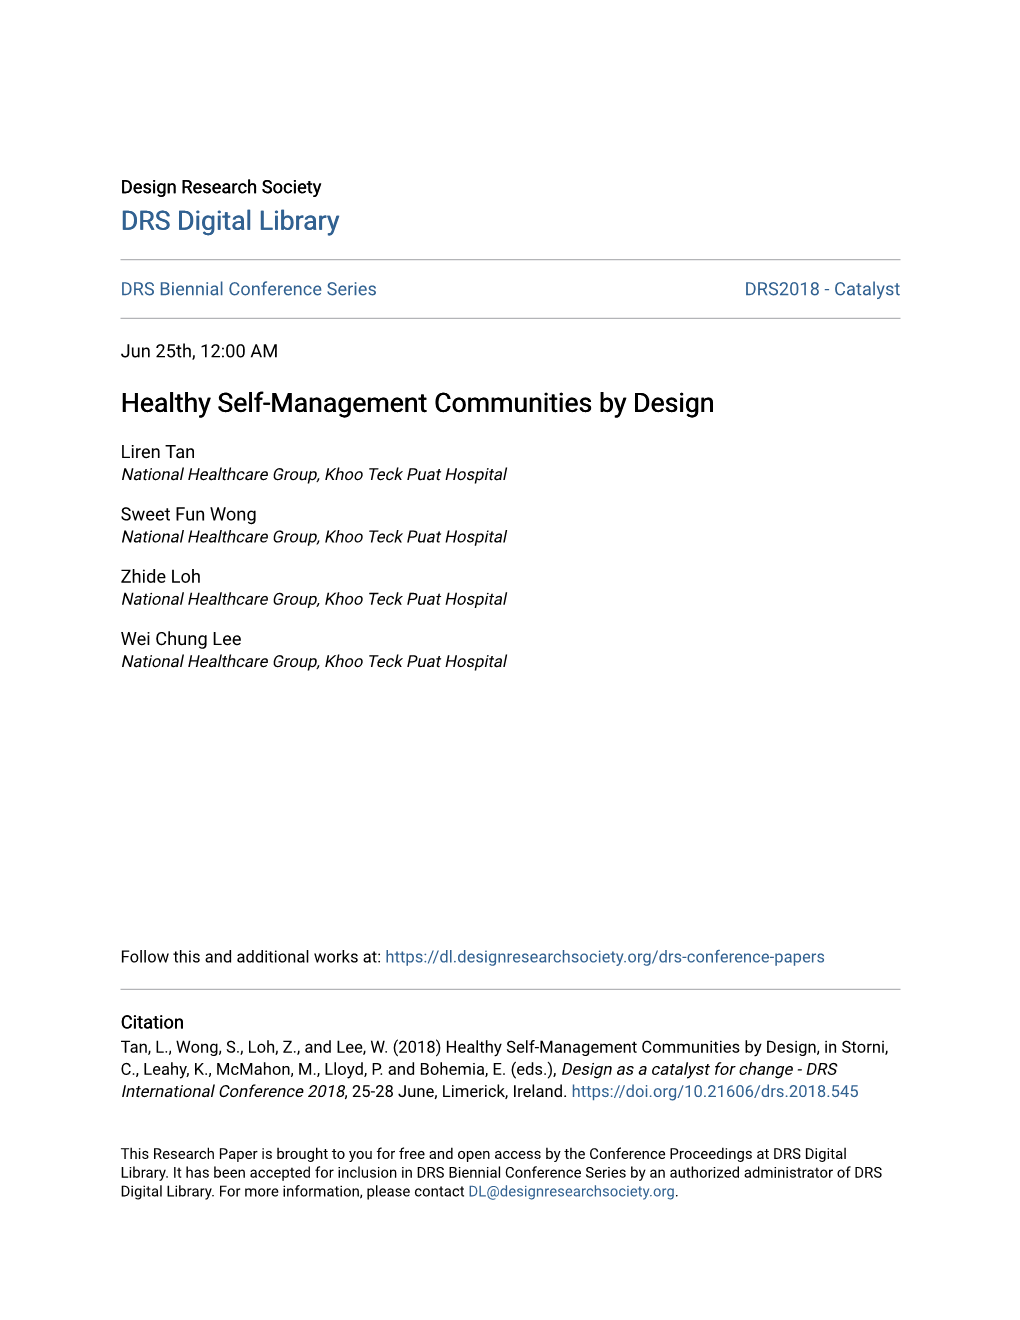 Healthy Self-Management Communities by Design